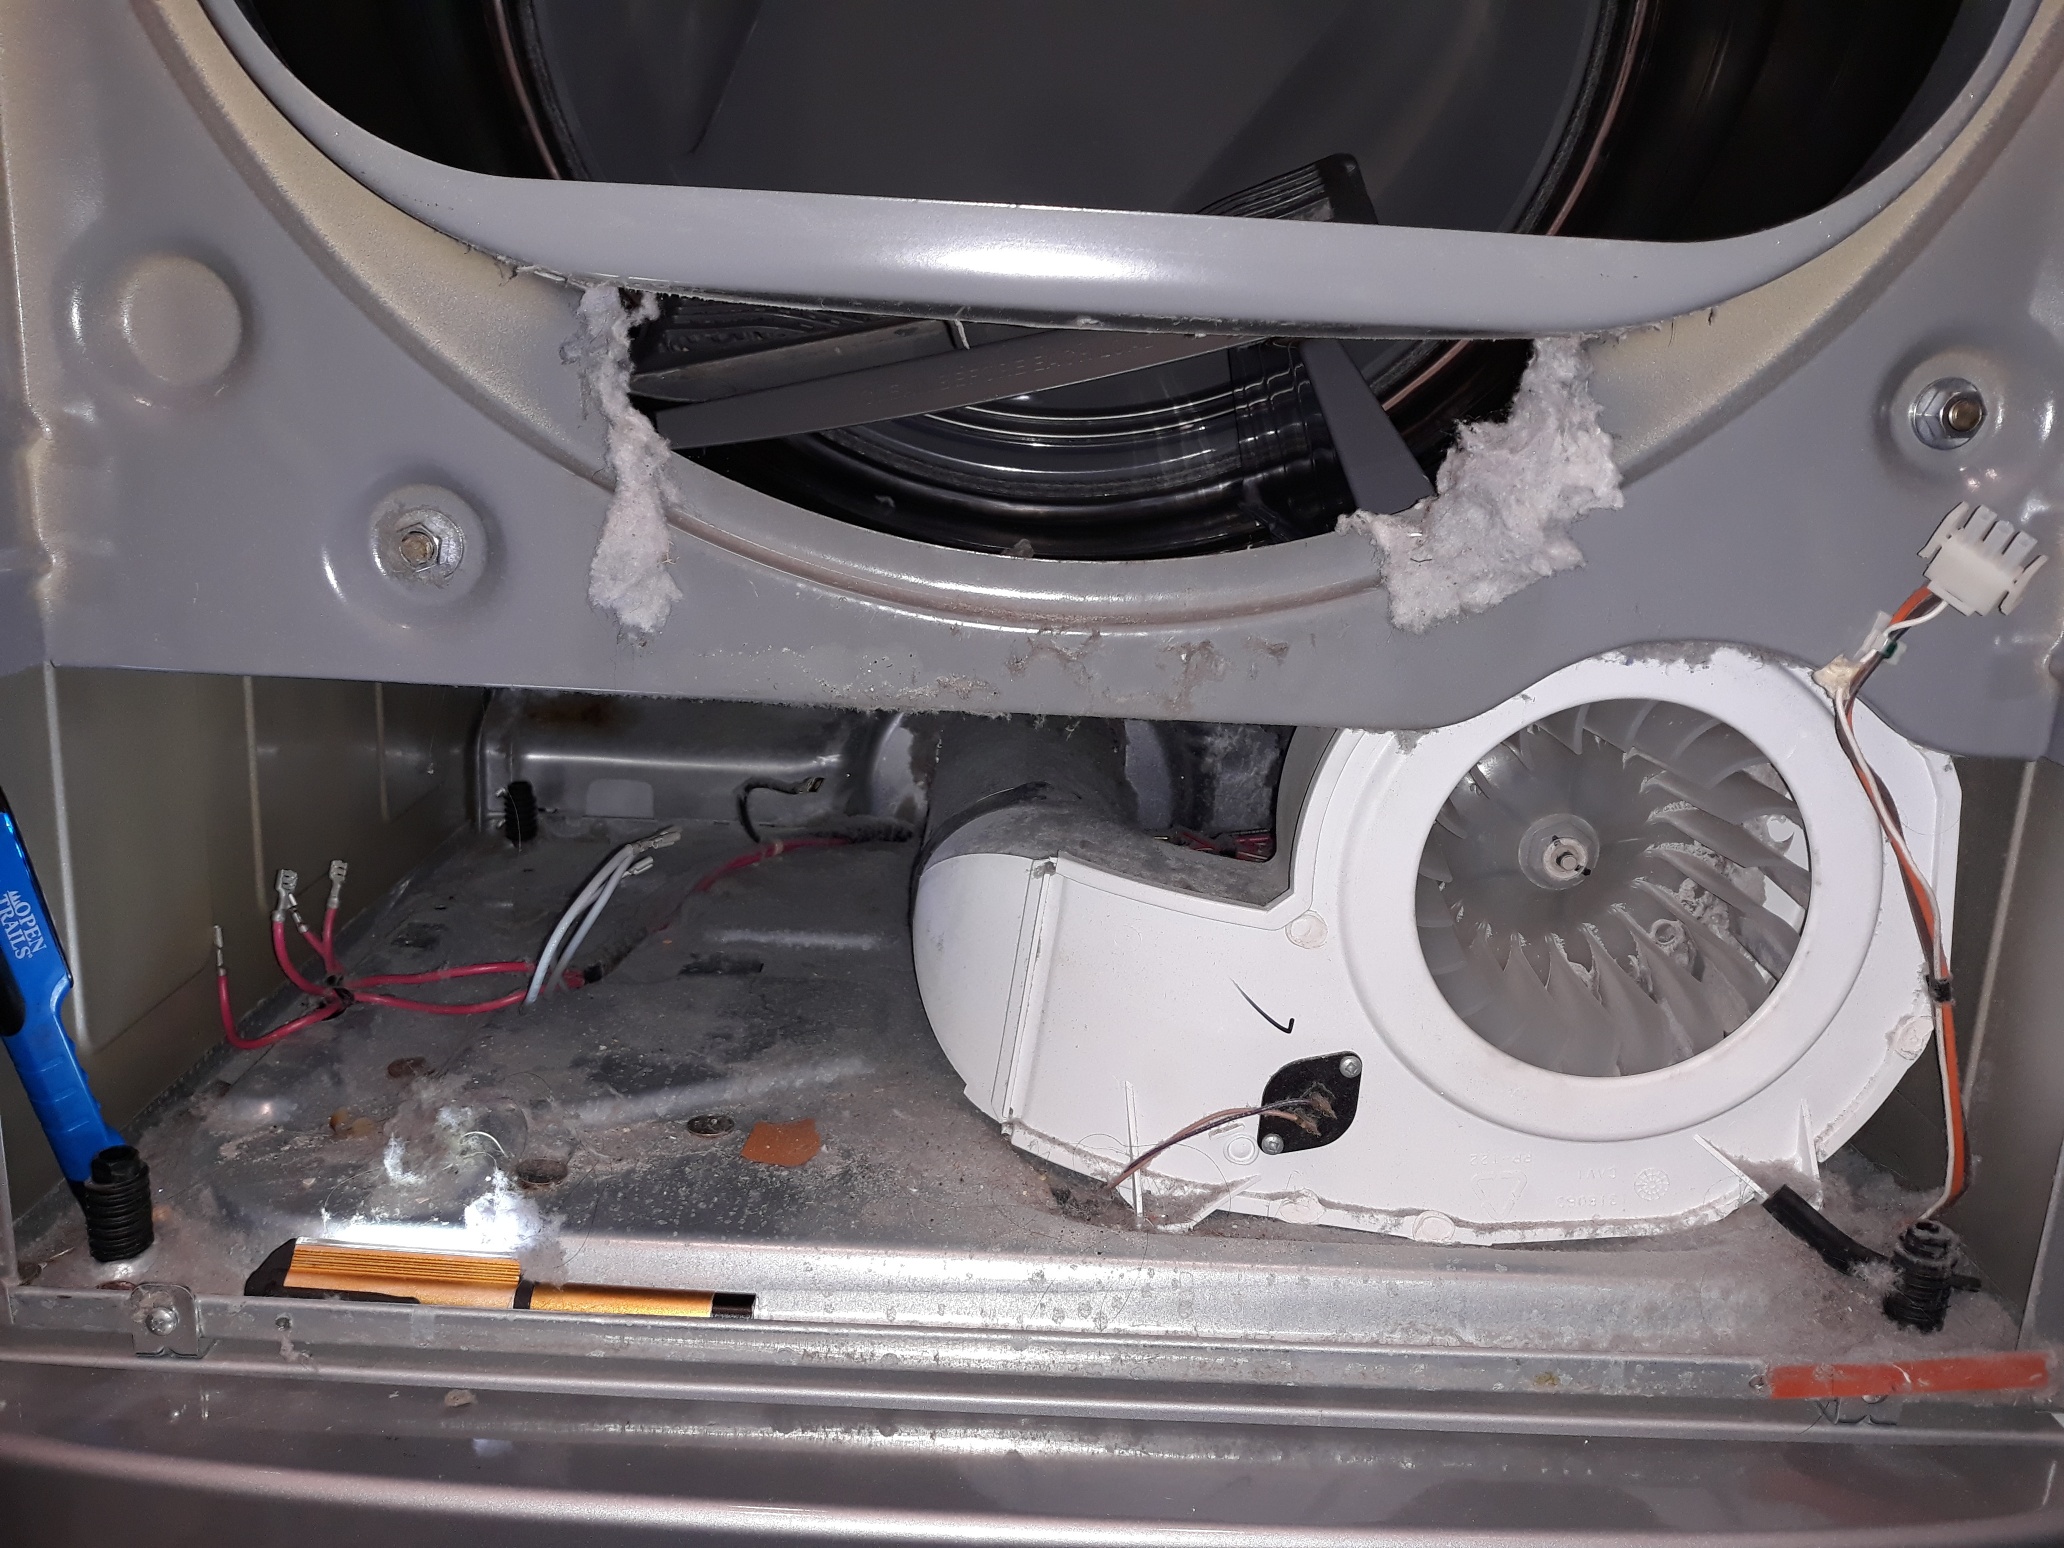 appliance repair dryer repair repaired by replacement of the failed heating element with a new part palmetto ave okahumpka fl 34762